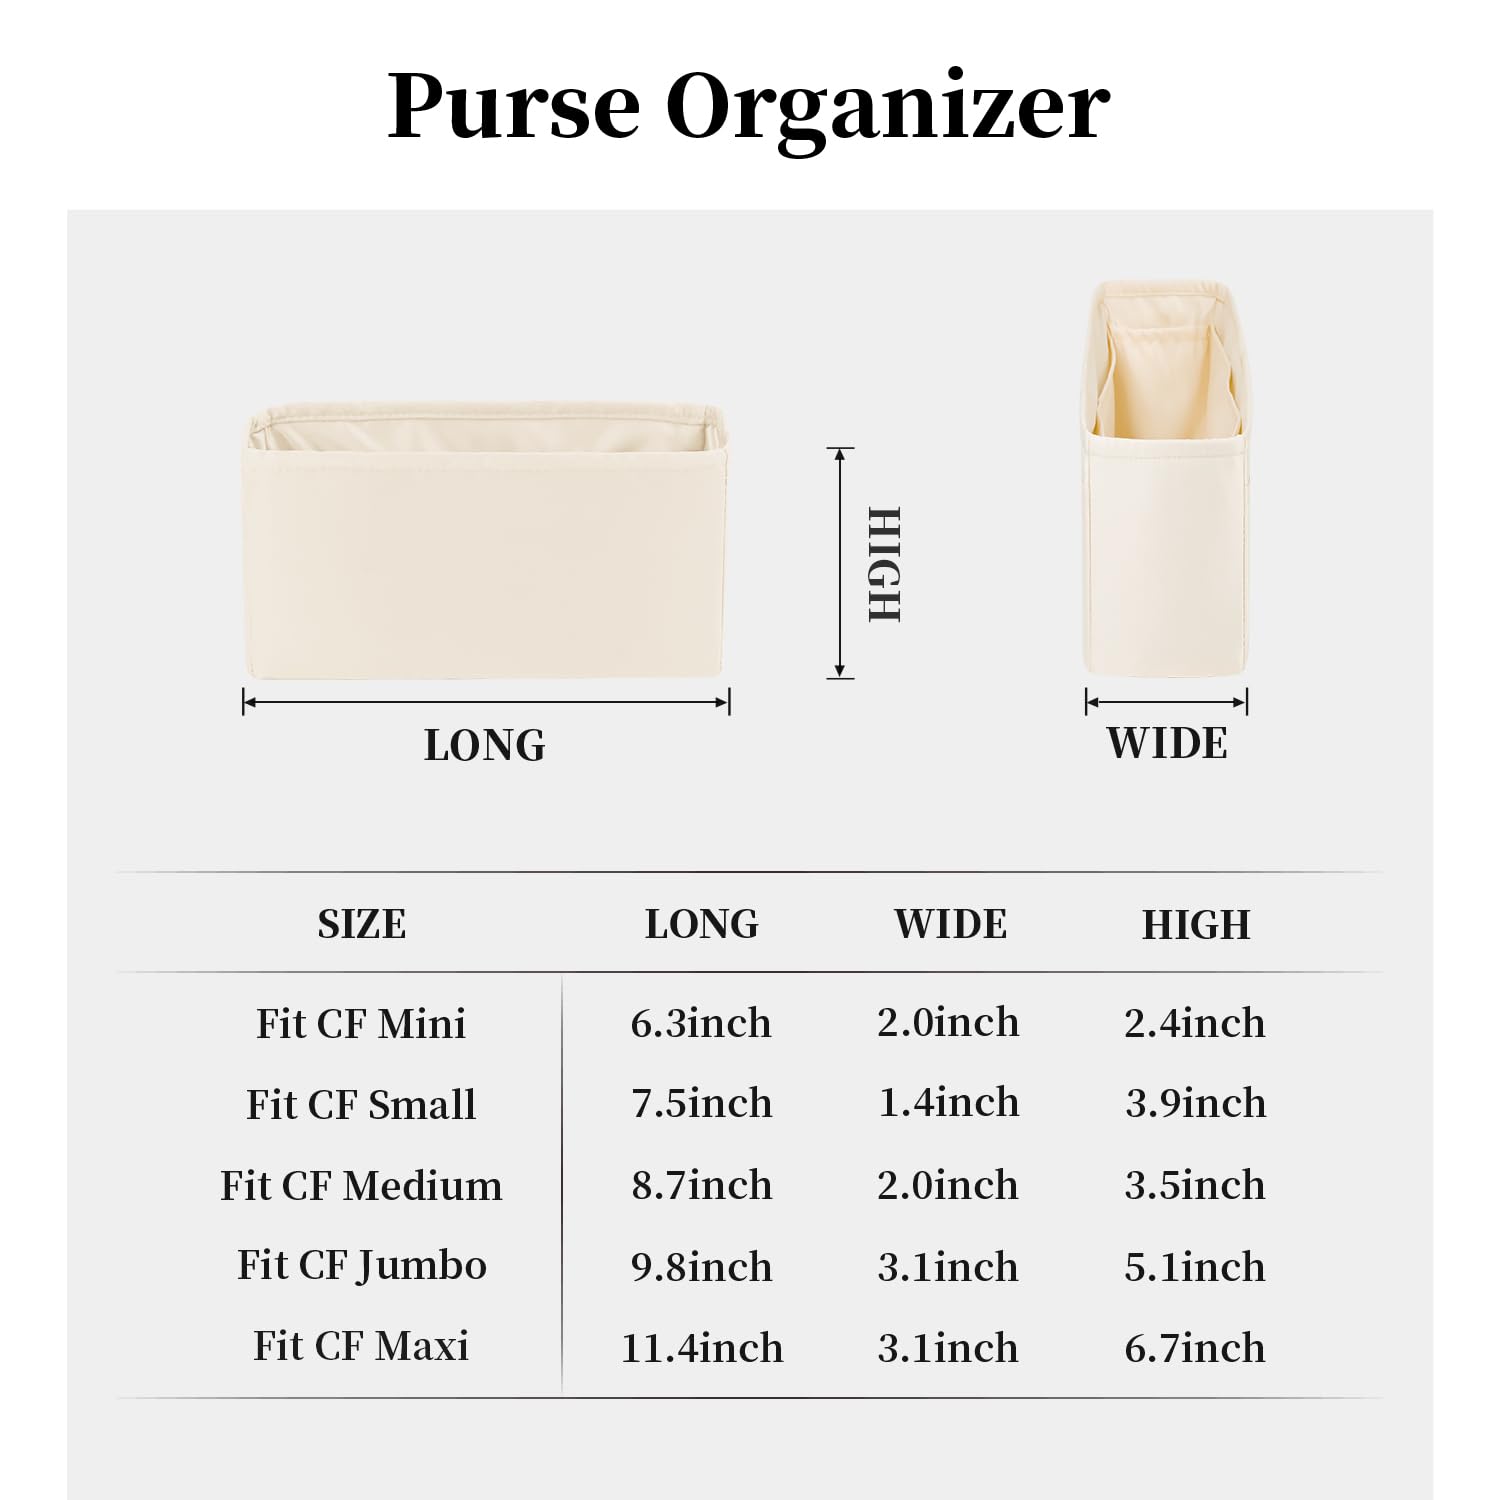 KINGS IN BAG Organizer for Purse Bags Tote Handbag Organizer with Silky Satin Fit for Chanel CF Mini/Small/Medium/Jumbo/Maxi Lightweight Shaper for Daily Use, 8 Pockets (Craie, Chanel CF Medium)